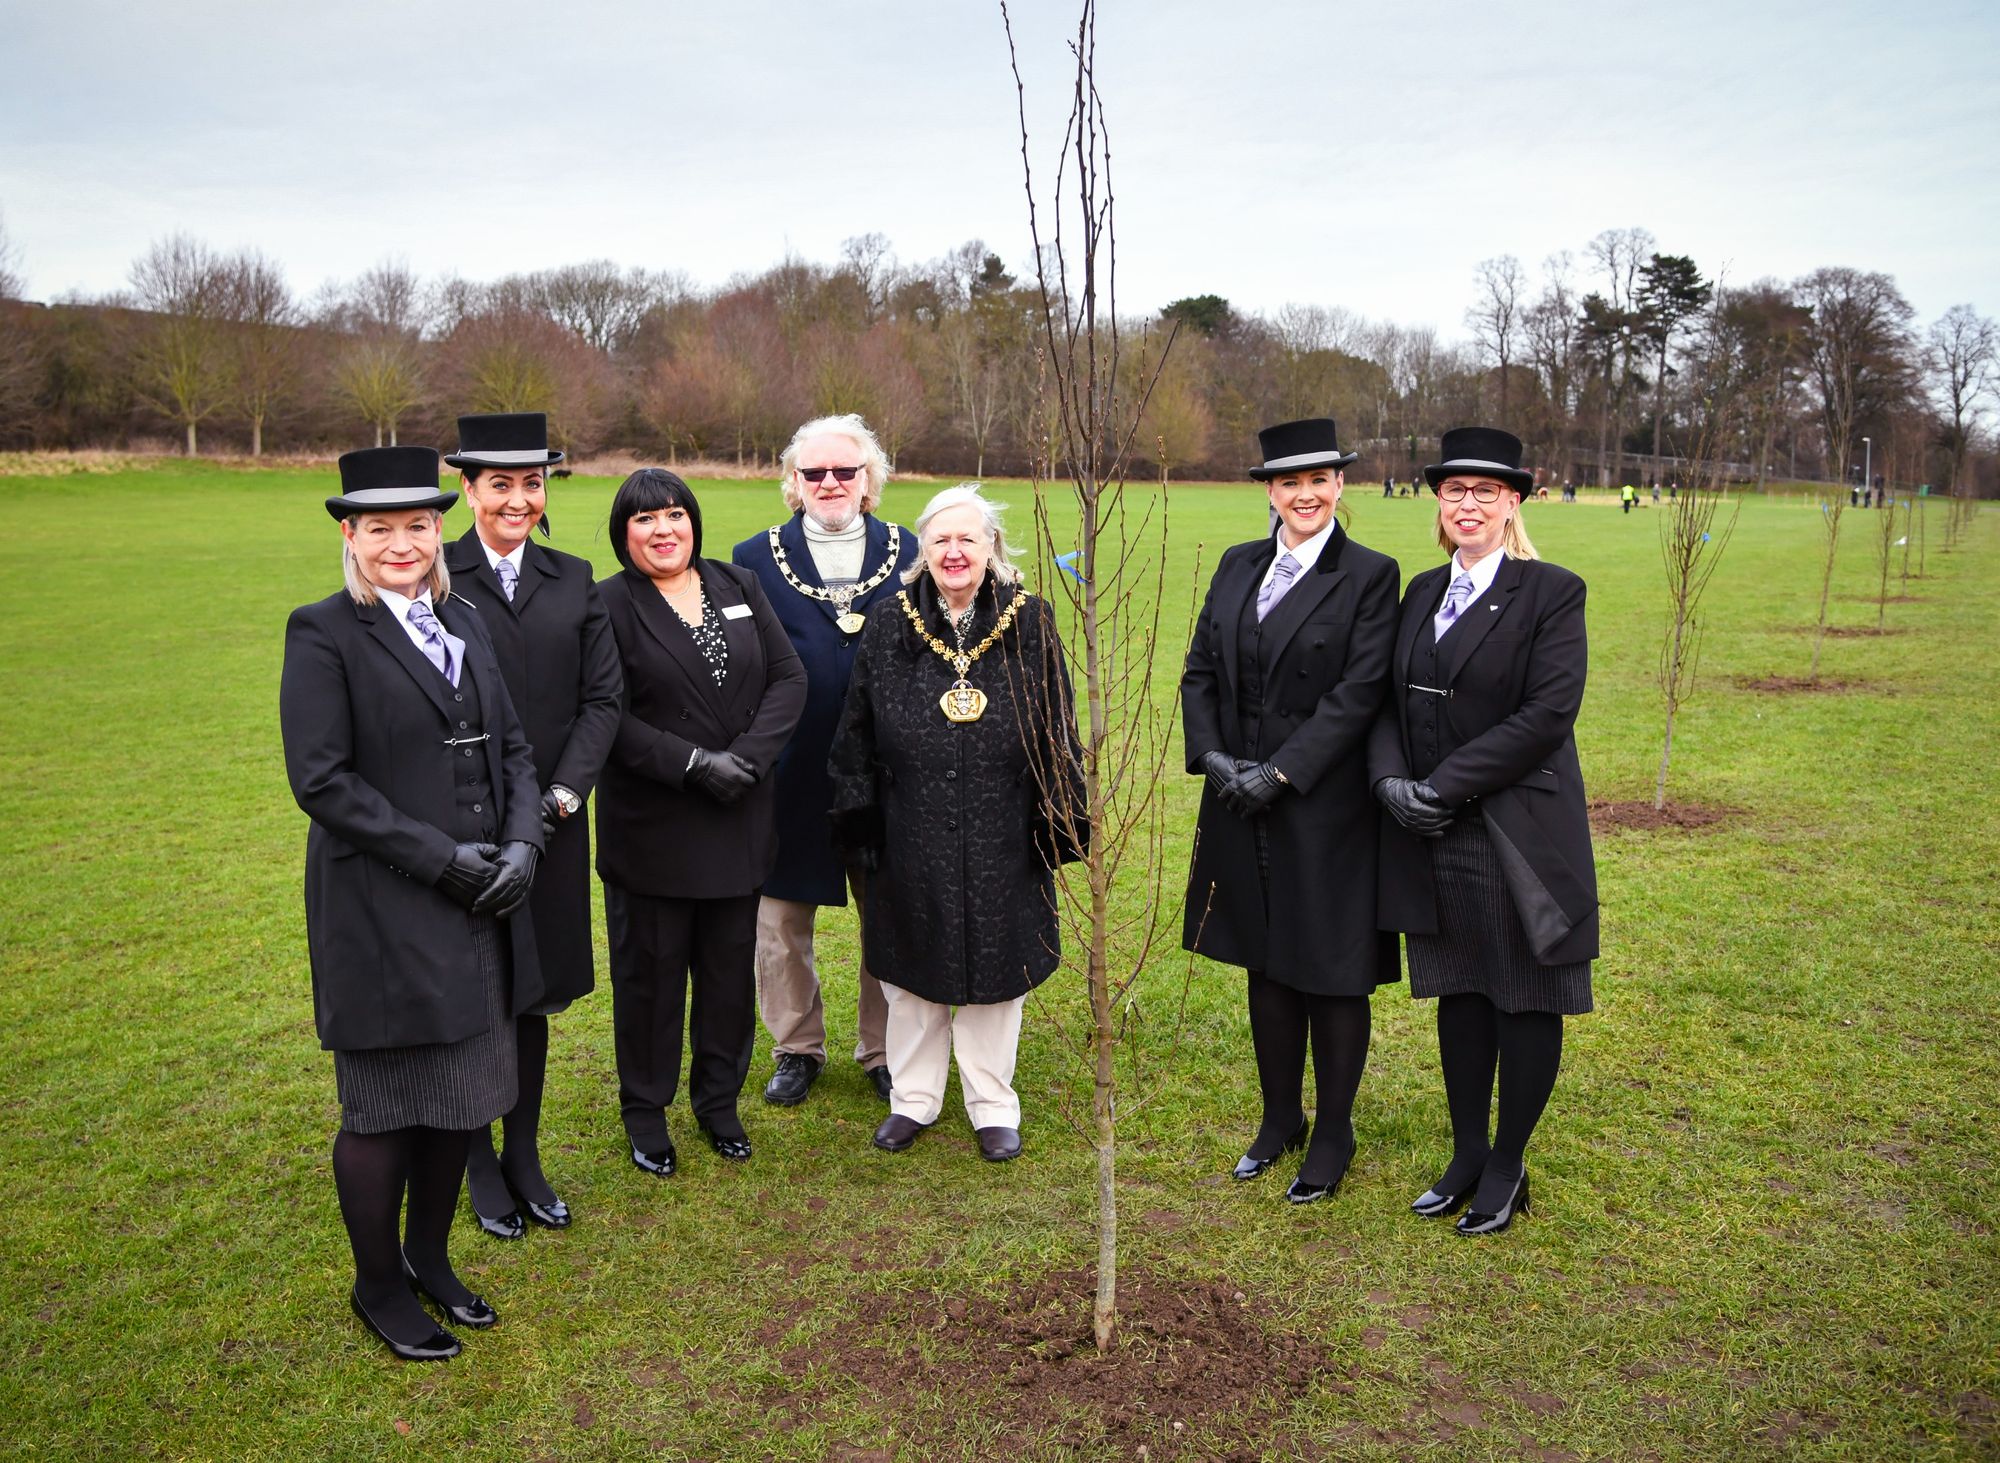 Burton funeral team invited to plant commemorative trees to mark Queen’s Jubilee